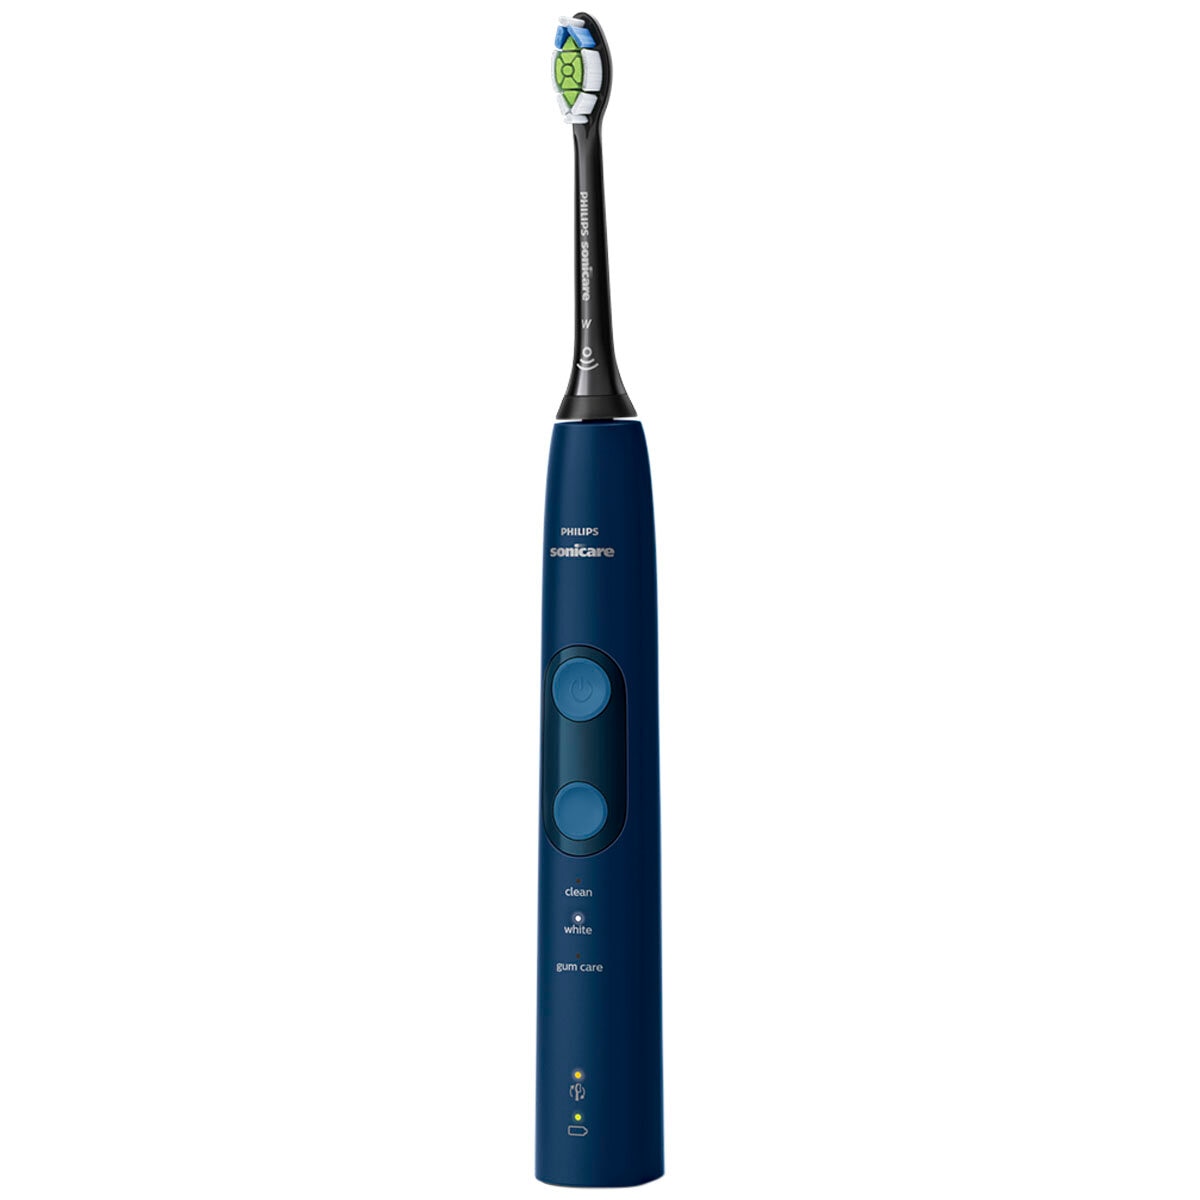 Philips Sonicare ProtectiveClean Whitening Electric Toothbrush, Navy Blue